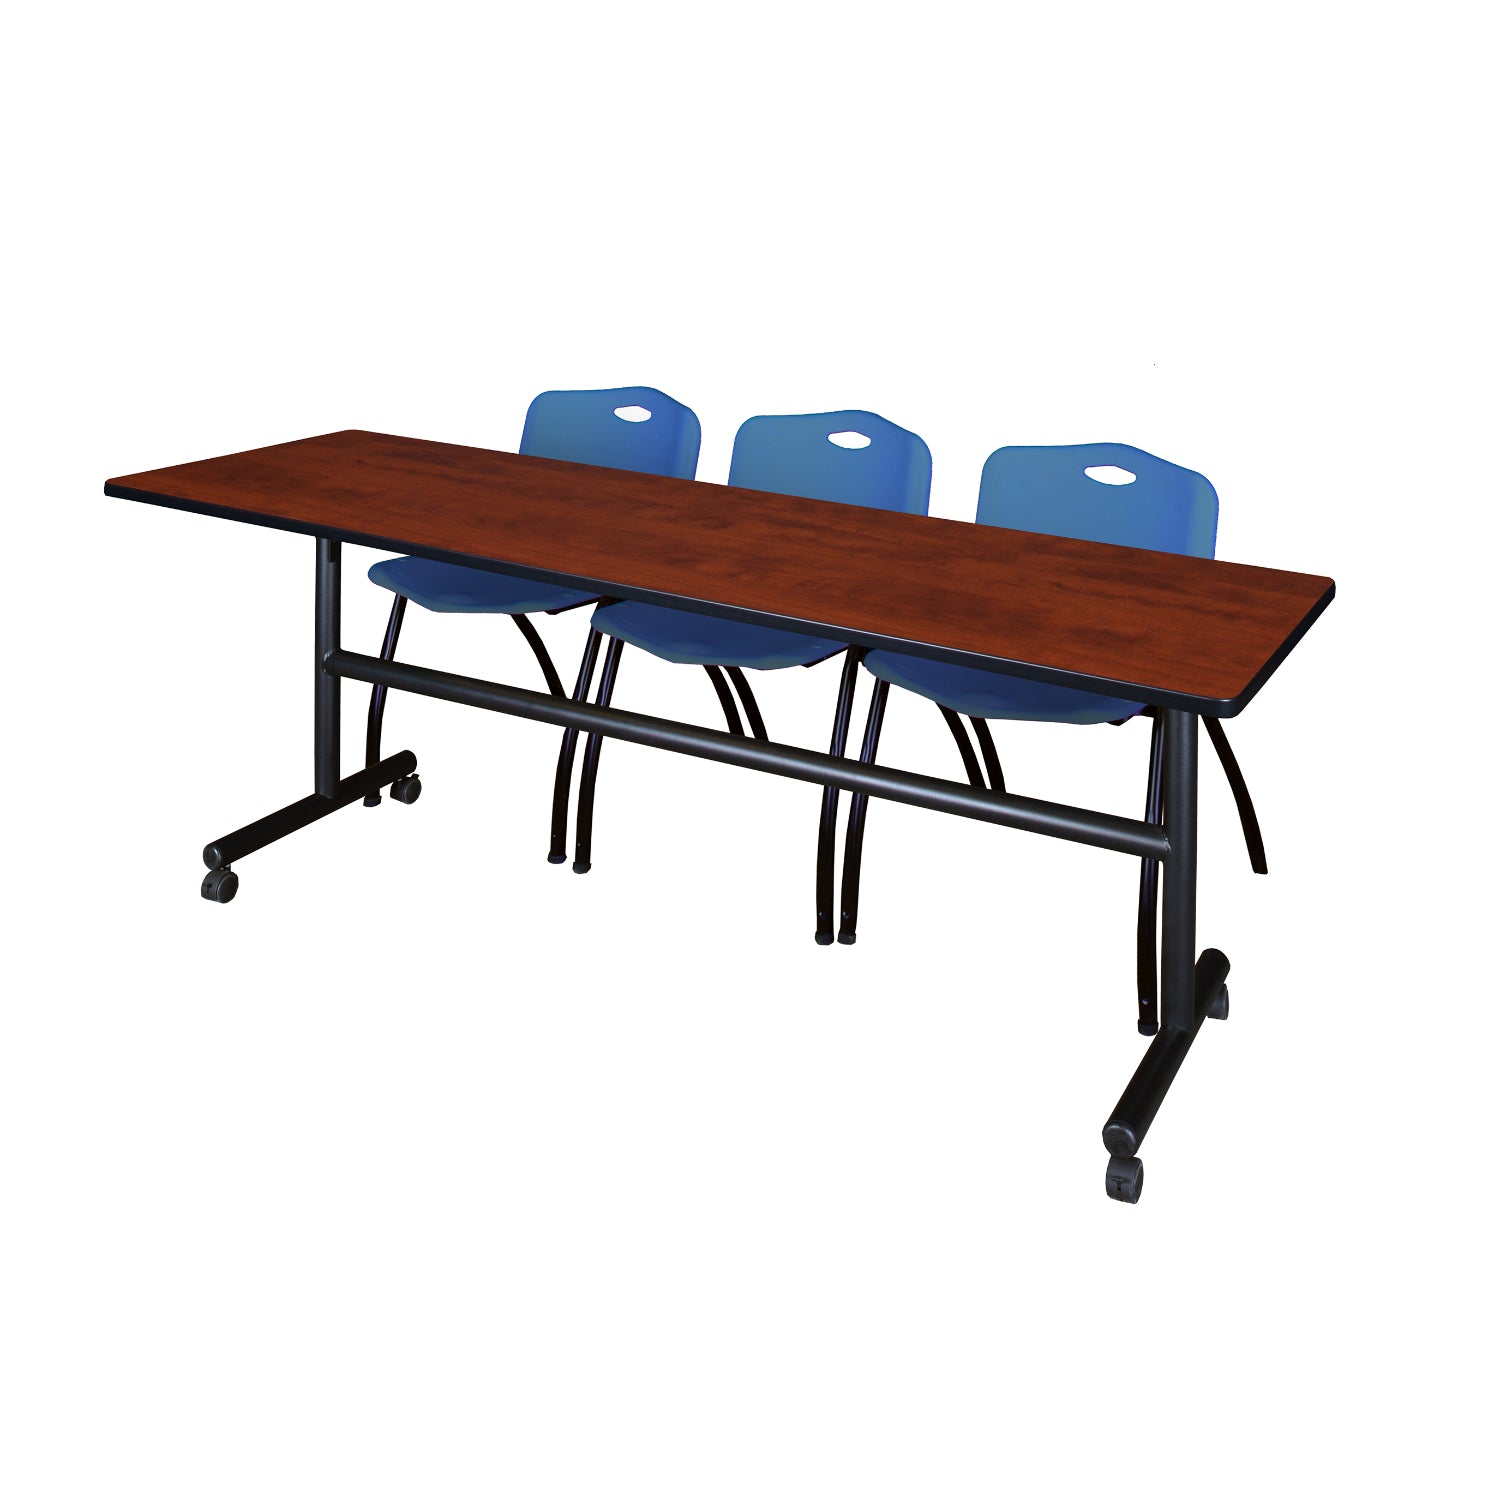 Kobe Flip Top Training Table and Chair Package, Kobe 84" x 24" Flip Top Mobile Nesting Table with 3 "M" Stack Chairs